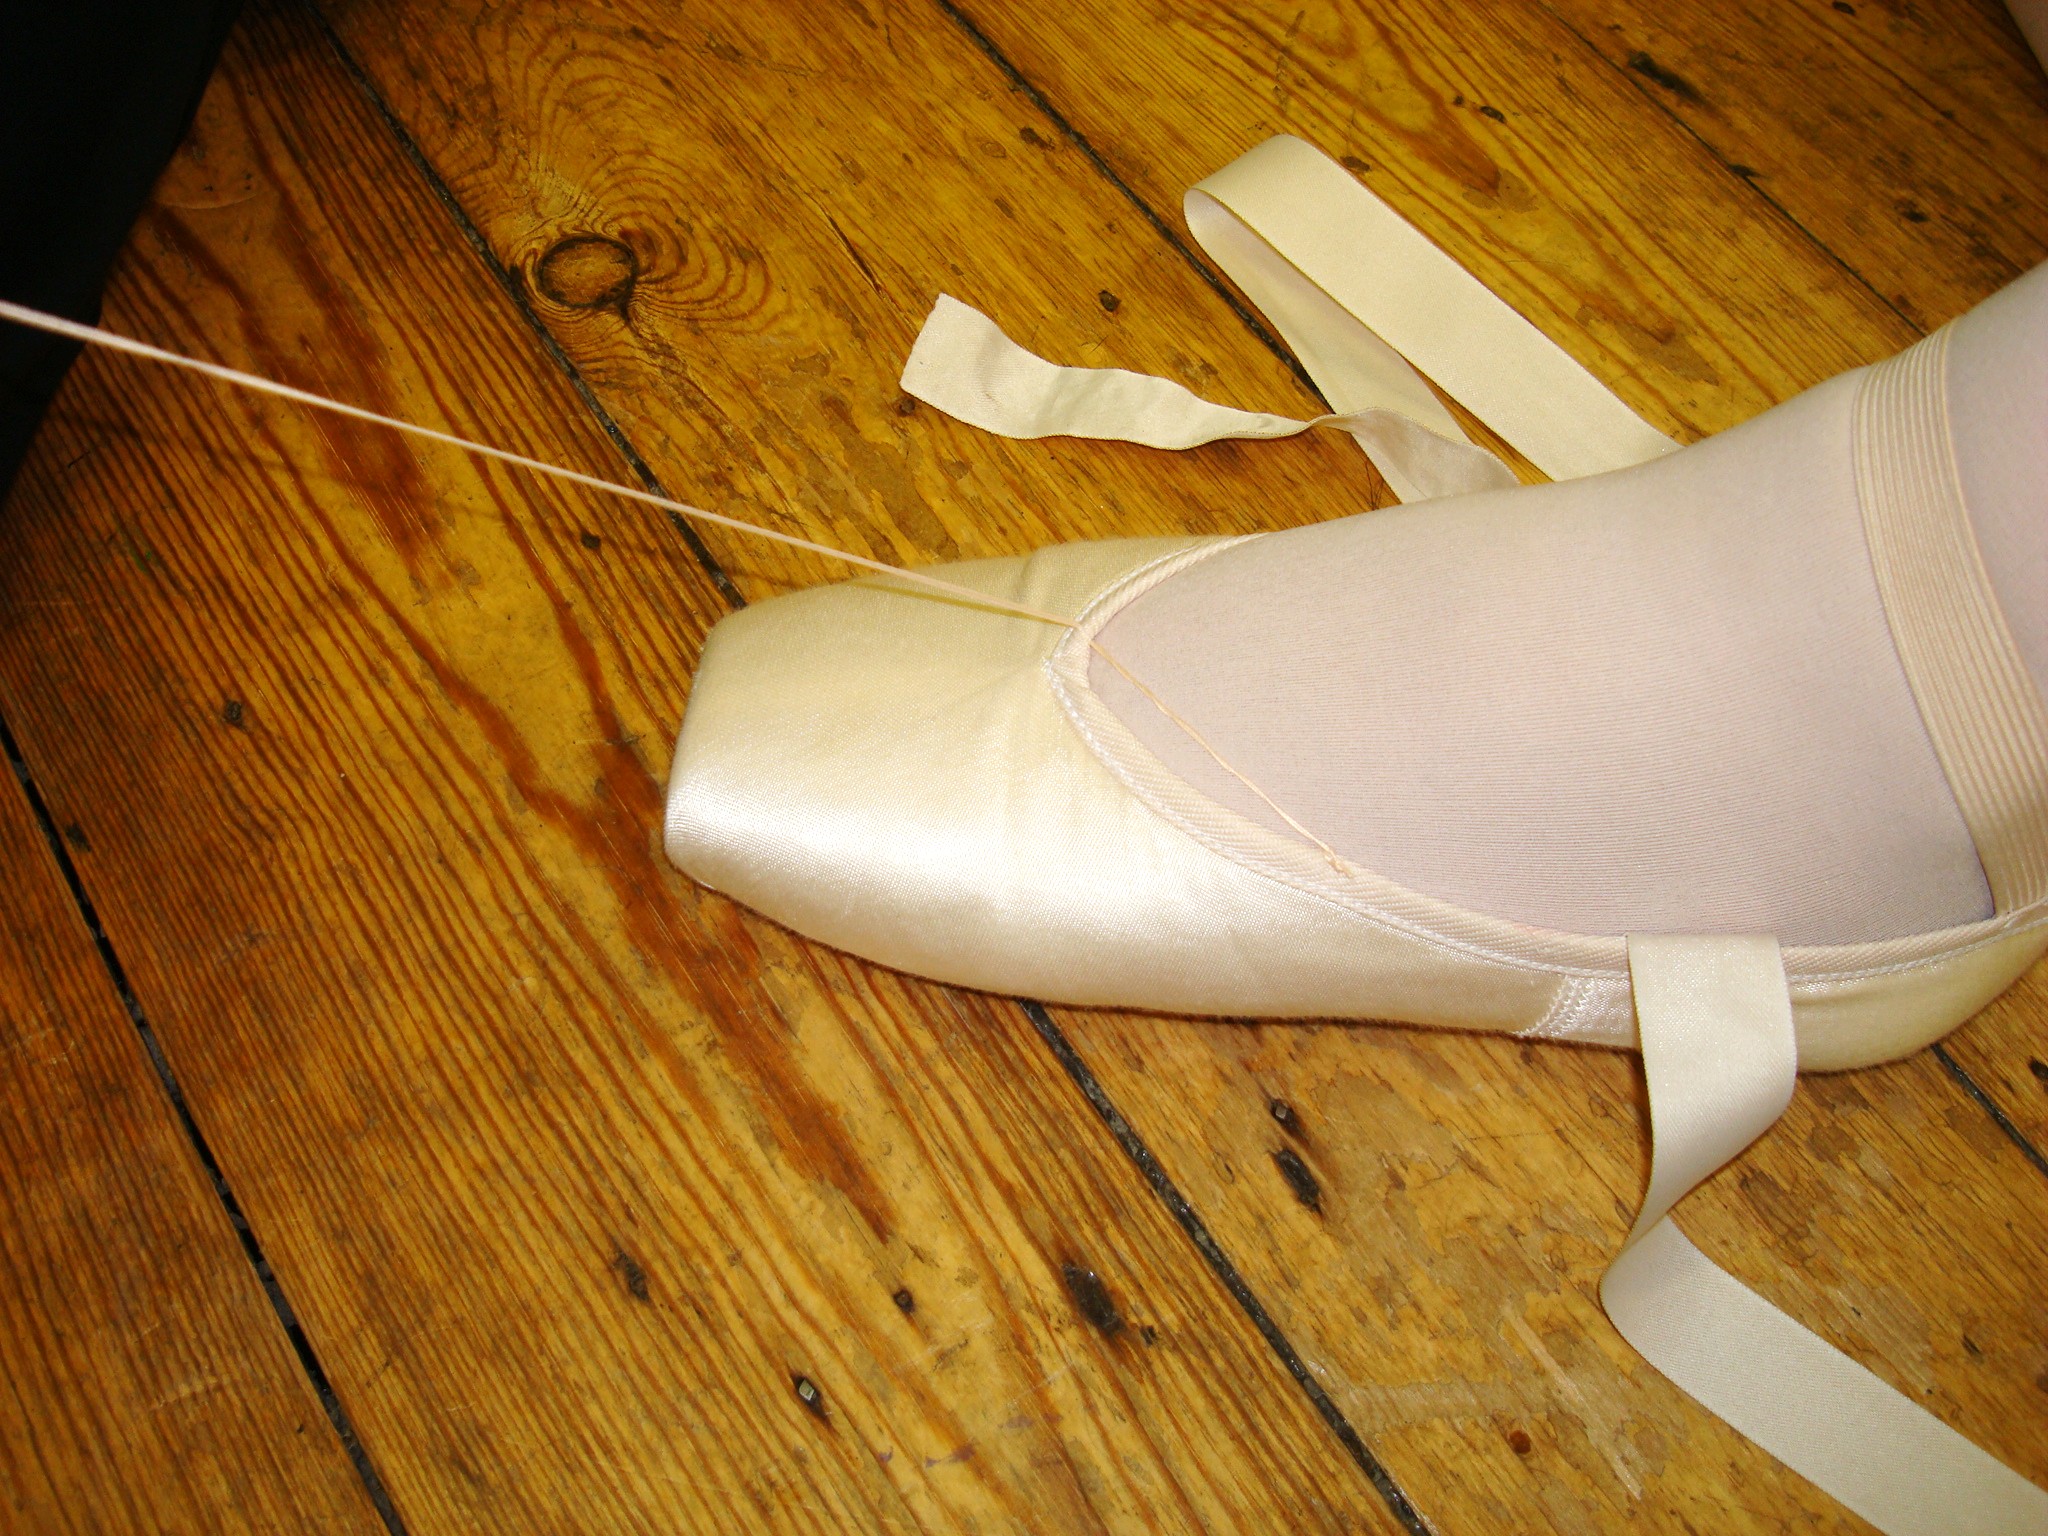 Sewing Ribbons on Pointe Shoes – Crafty Connie